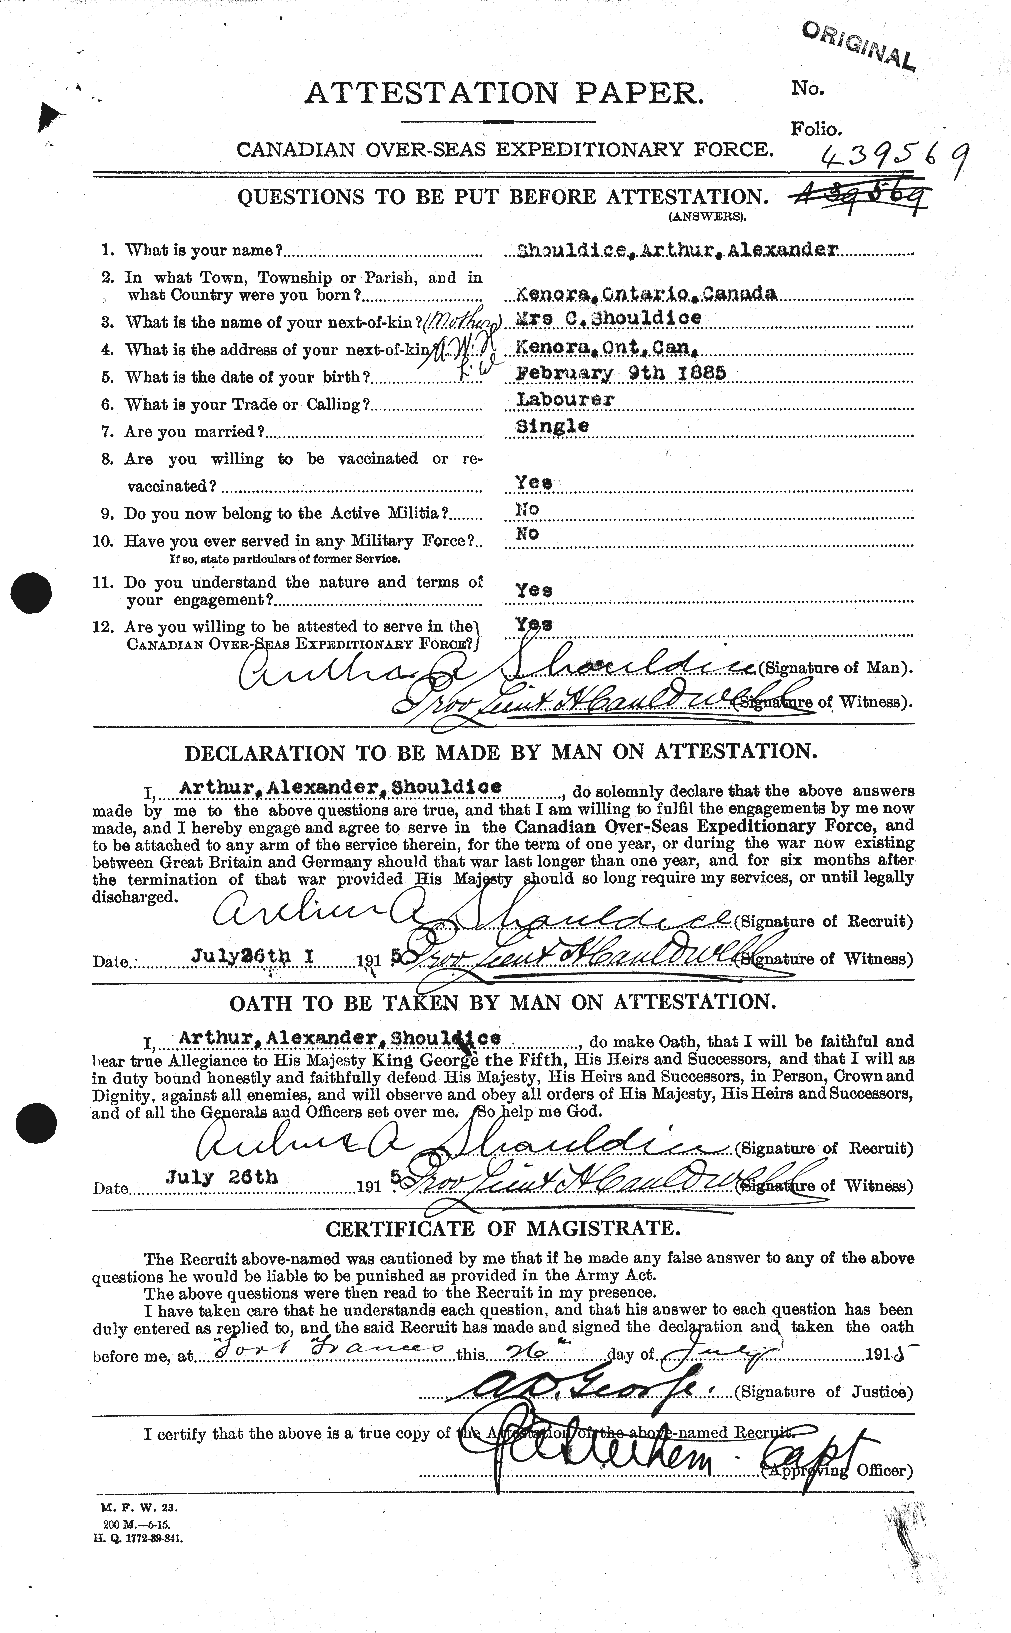 Personnel Records of the First World War - CEF 092882a